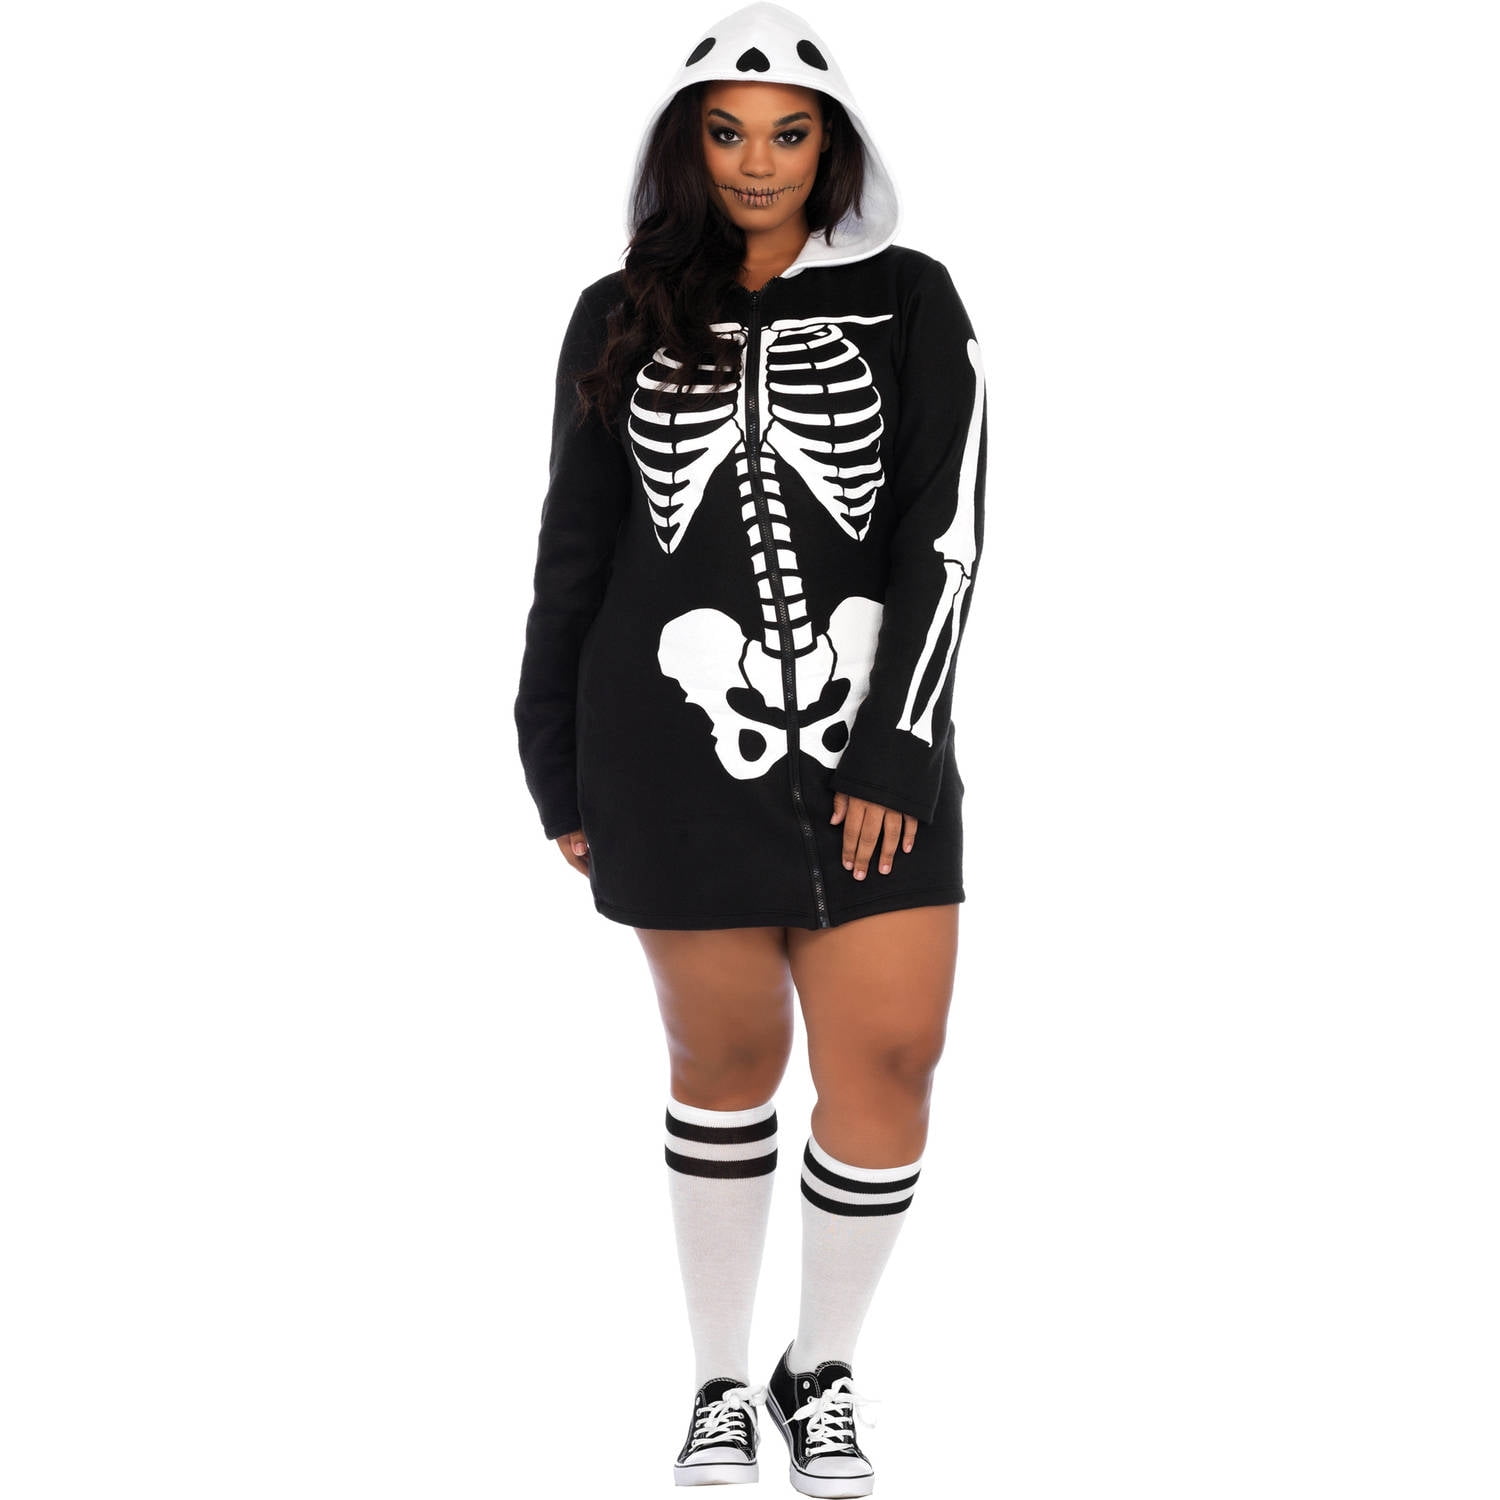 14-16 Womens Skull Queen Card Halloween Fancy Dress Costume Ladies Outfit 